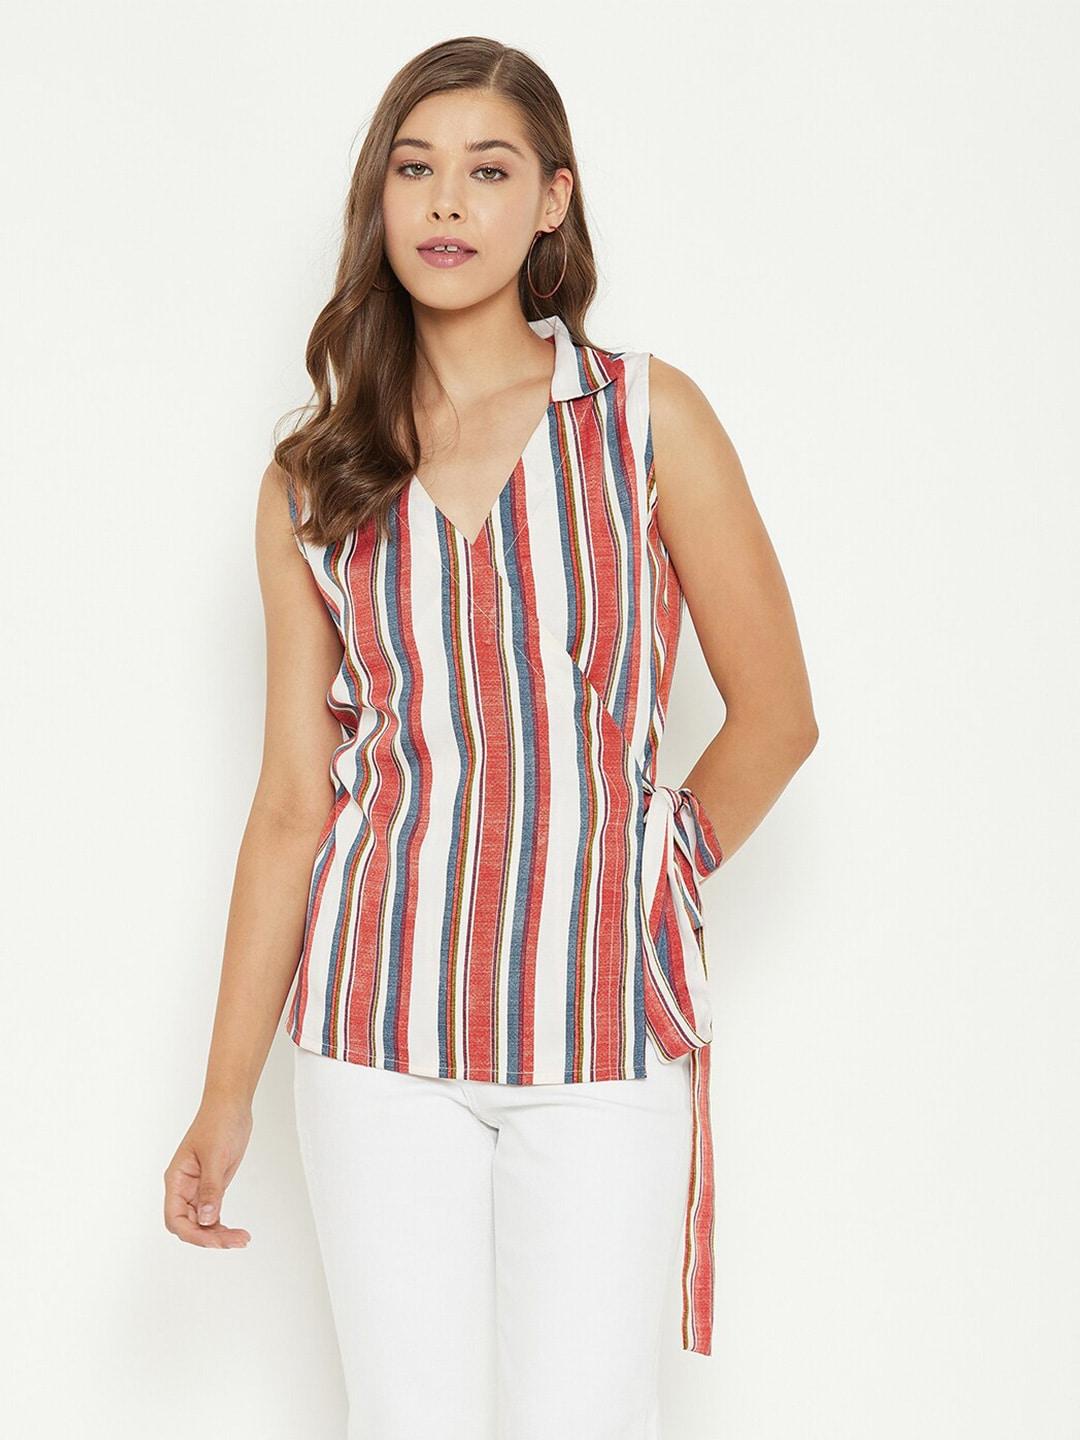 purys-off-white-&-red-striped-wrap-top